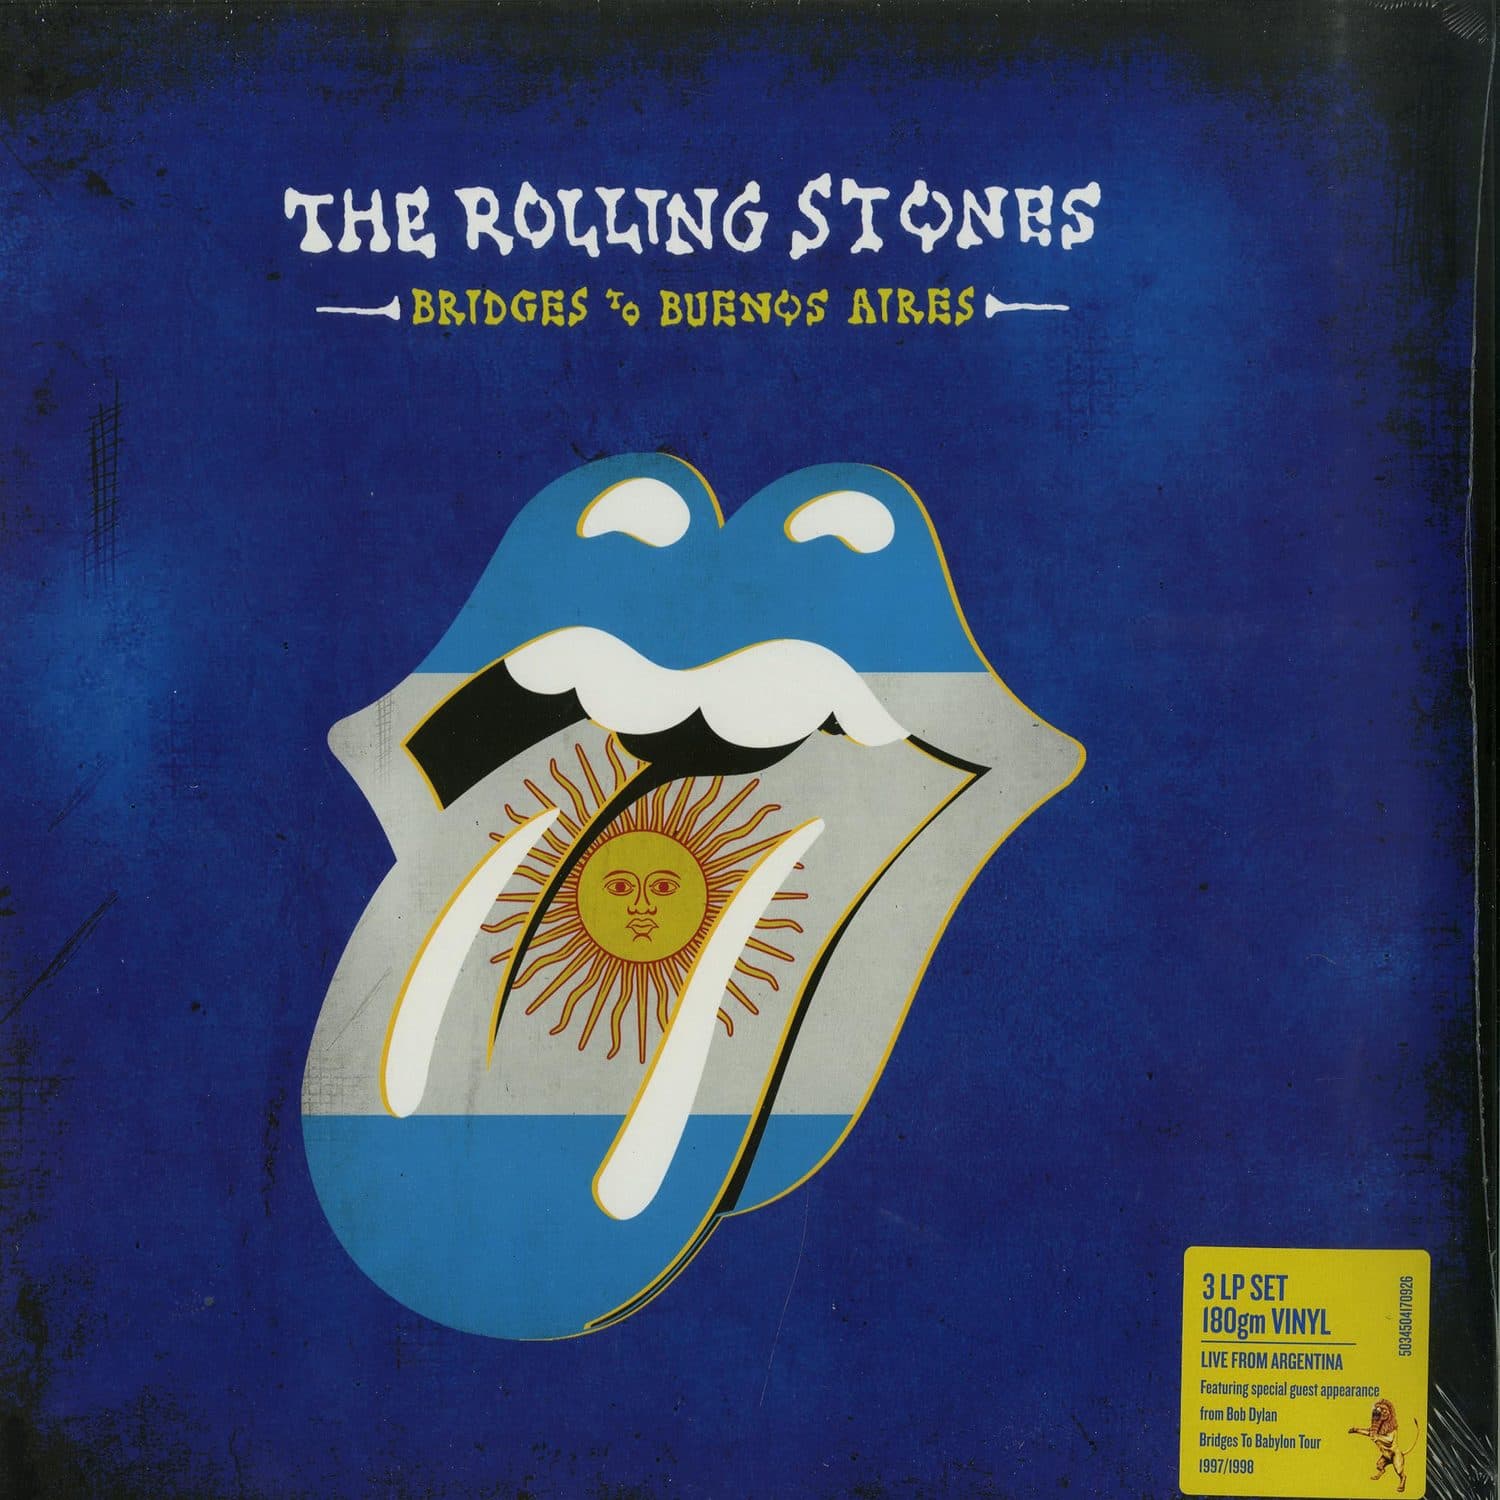 The Rolling Stones - BRIDGES TO BUENOS AIRES 